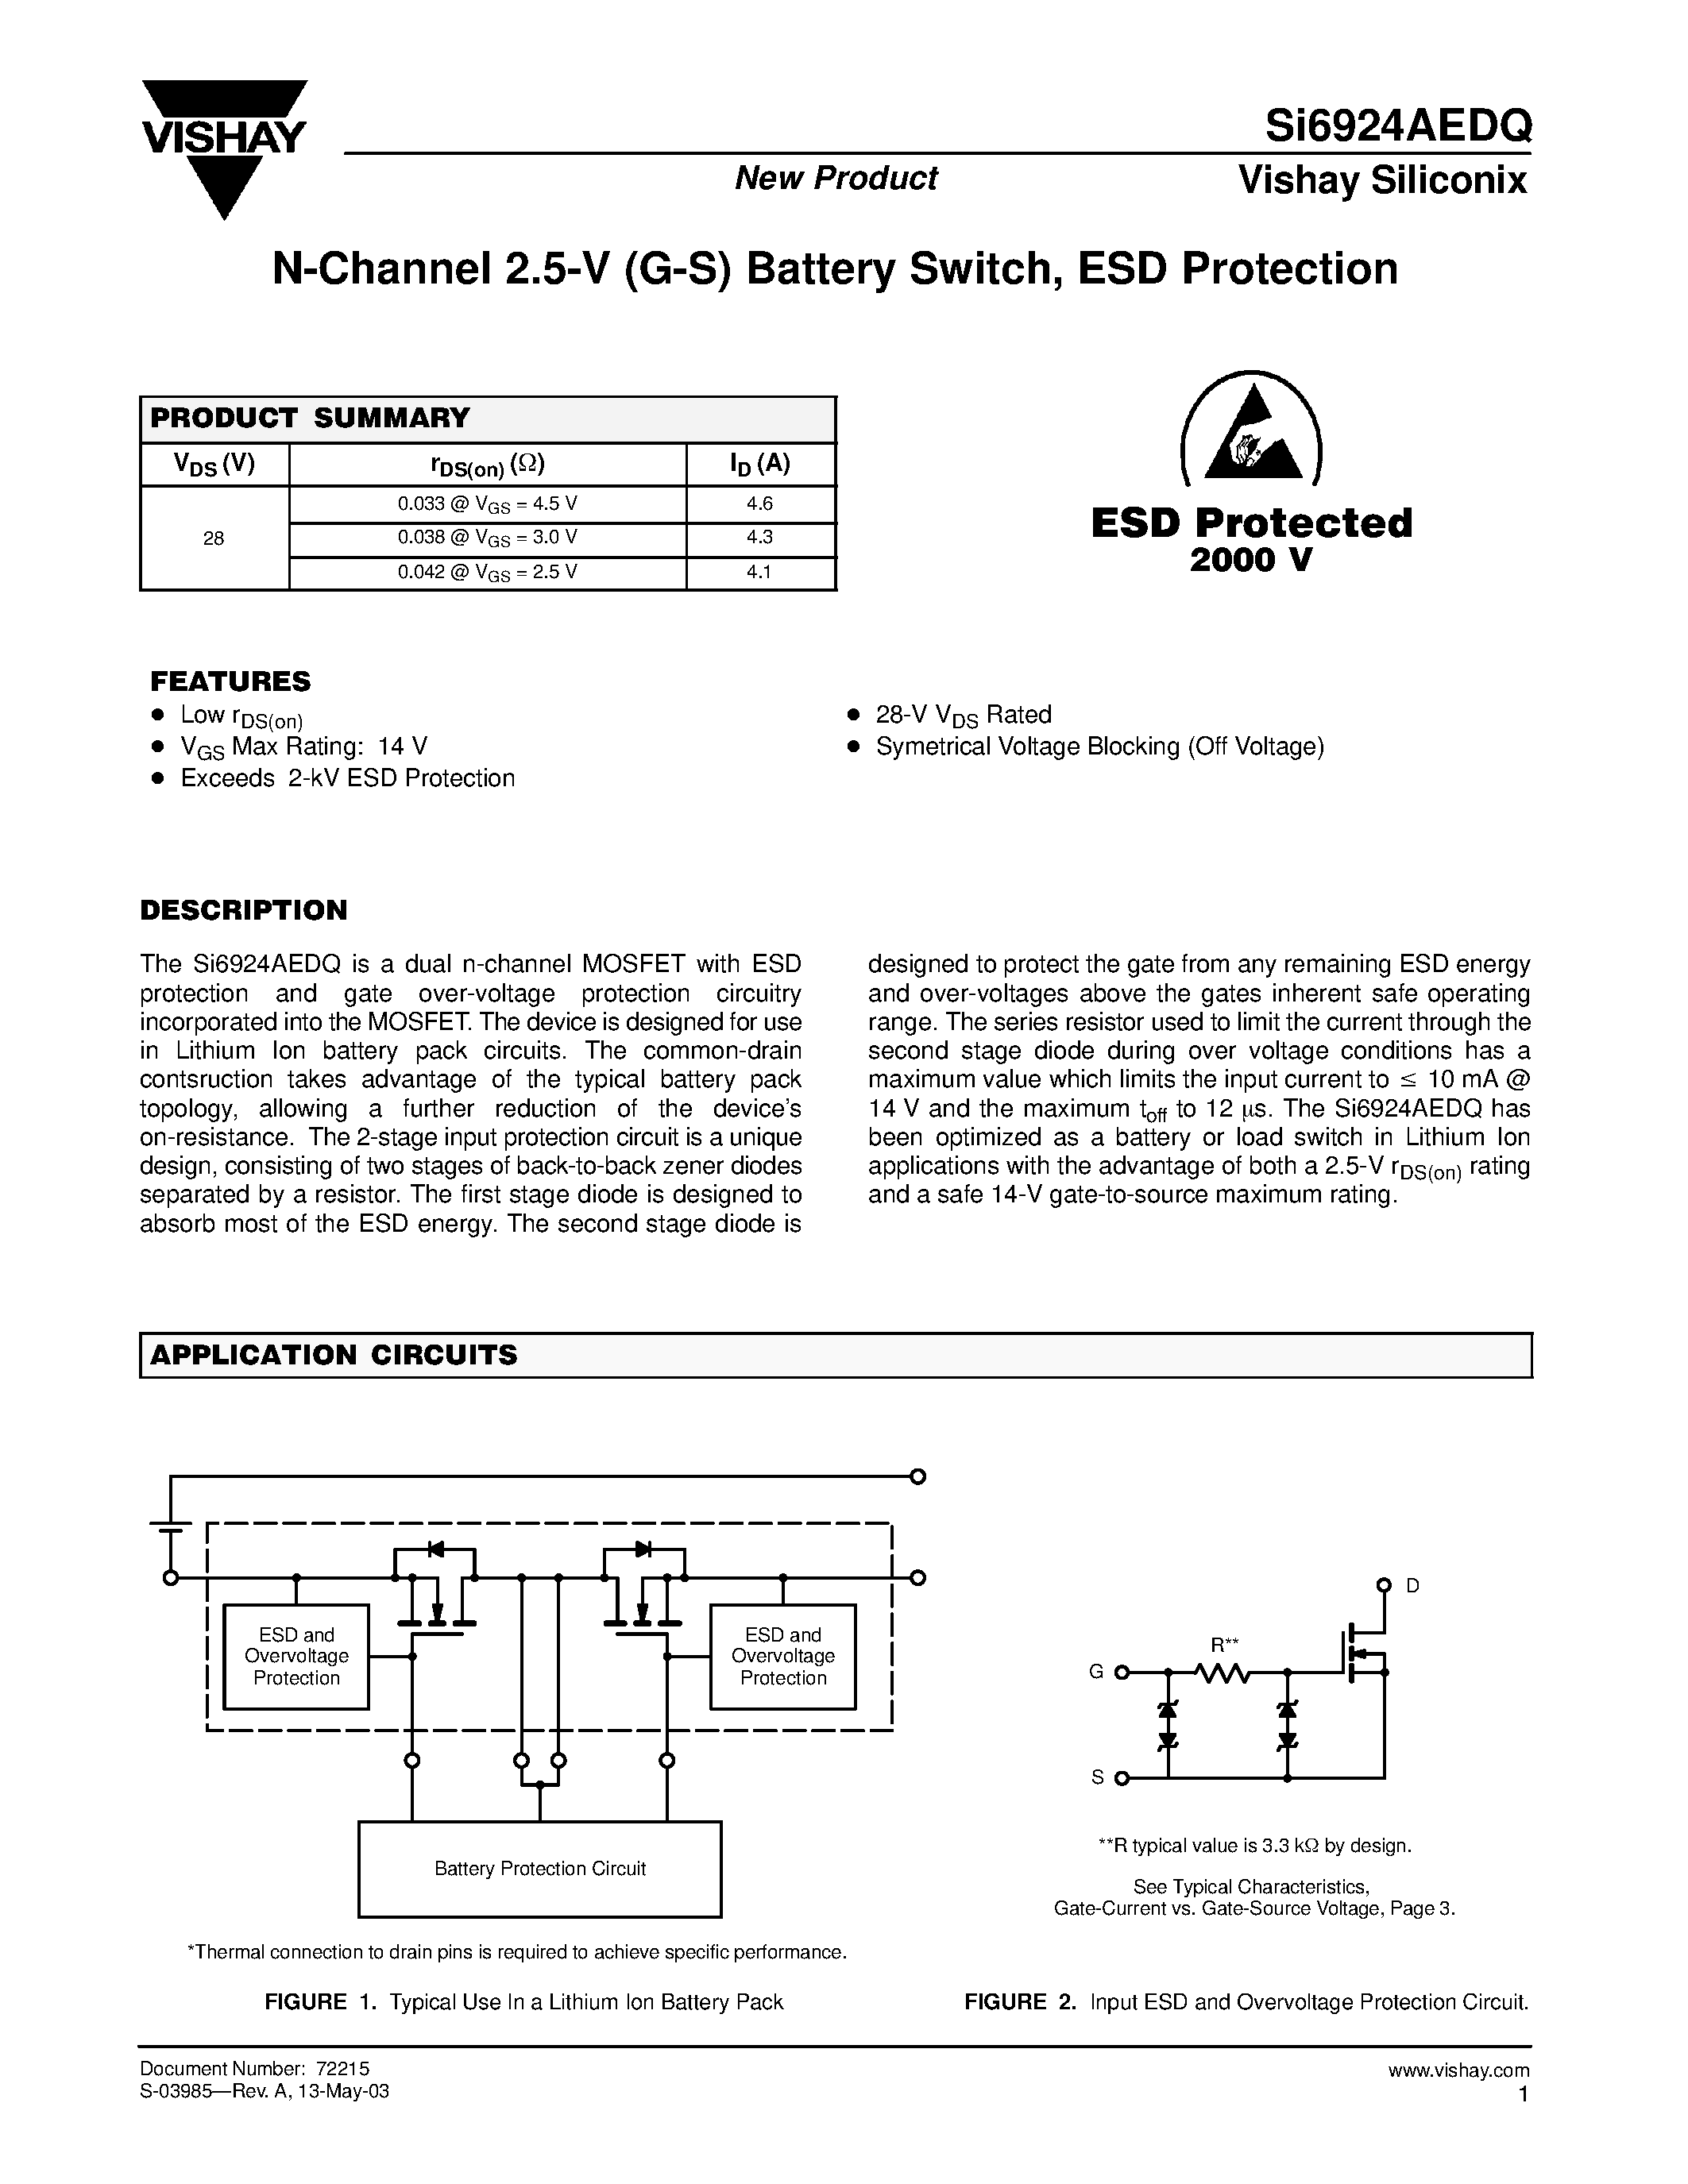 Datasheet SI6924AEDQ - N-Channel 2.5-V (G-S) Battery Switch/ ESD Protection page 1